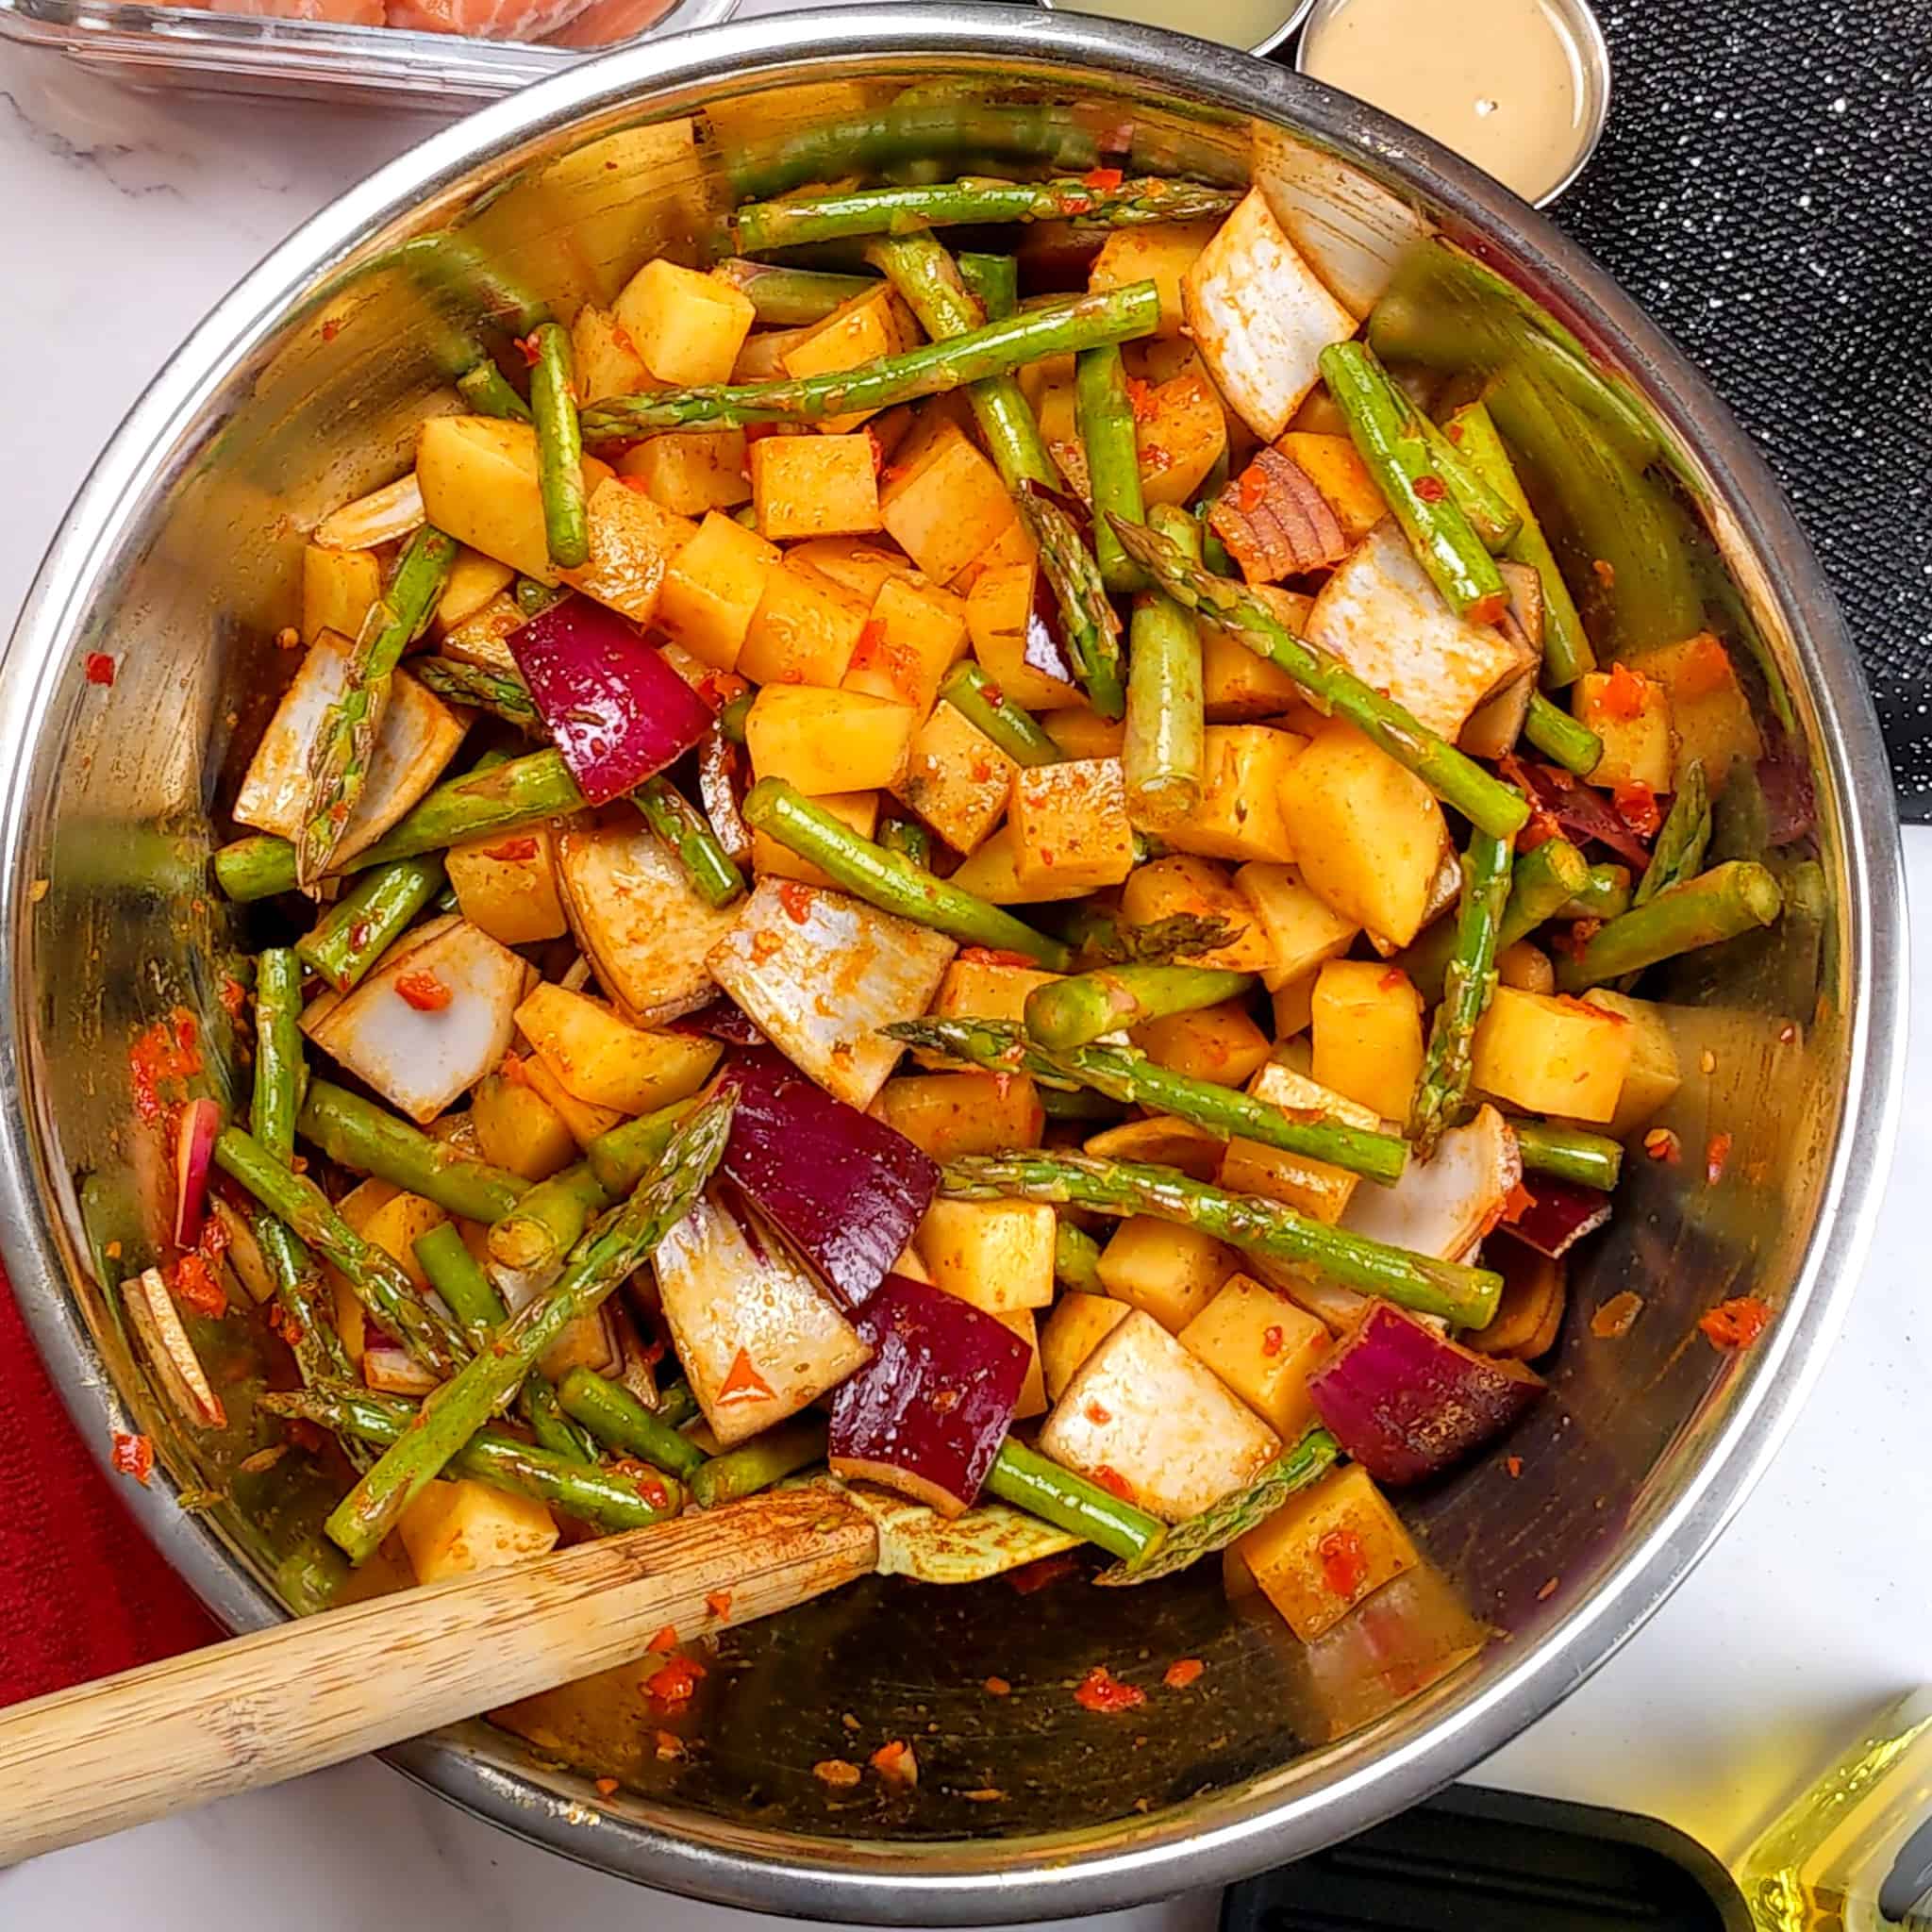 stainless steel bowl with the raw vegetables of large diced potatoes, cut asparagus and red onion in the calabrian chili wet rub with a silicone spatula tucked inside the mix.